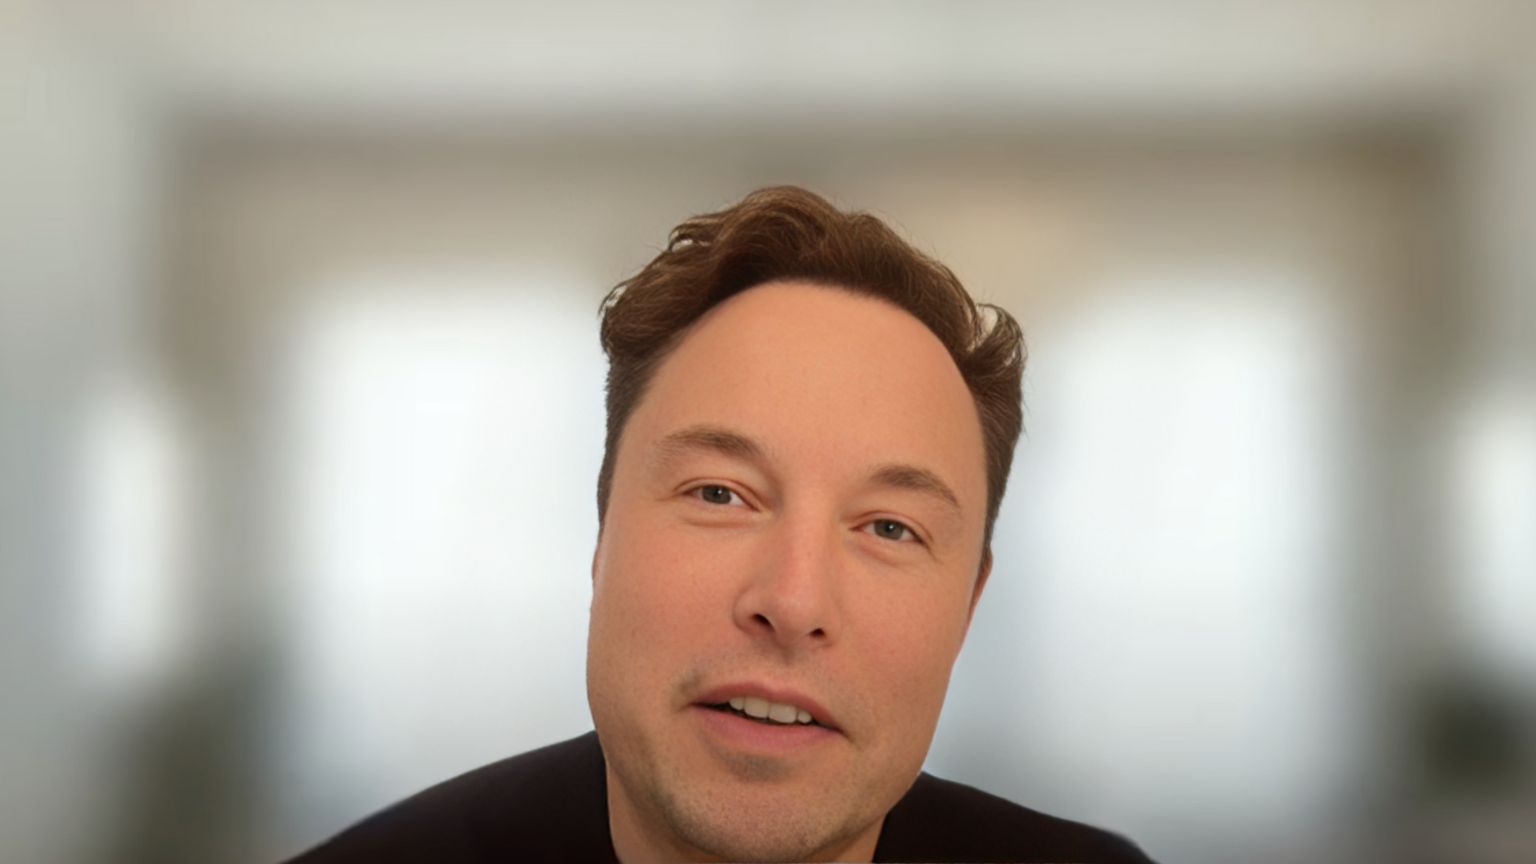 EU invites Elon Musk to testify about Twitter